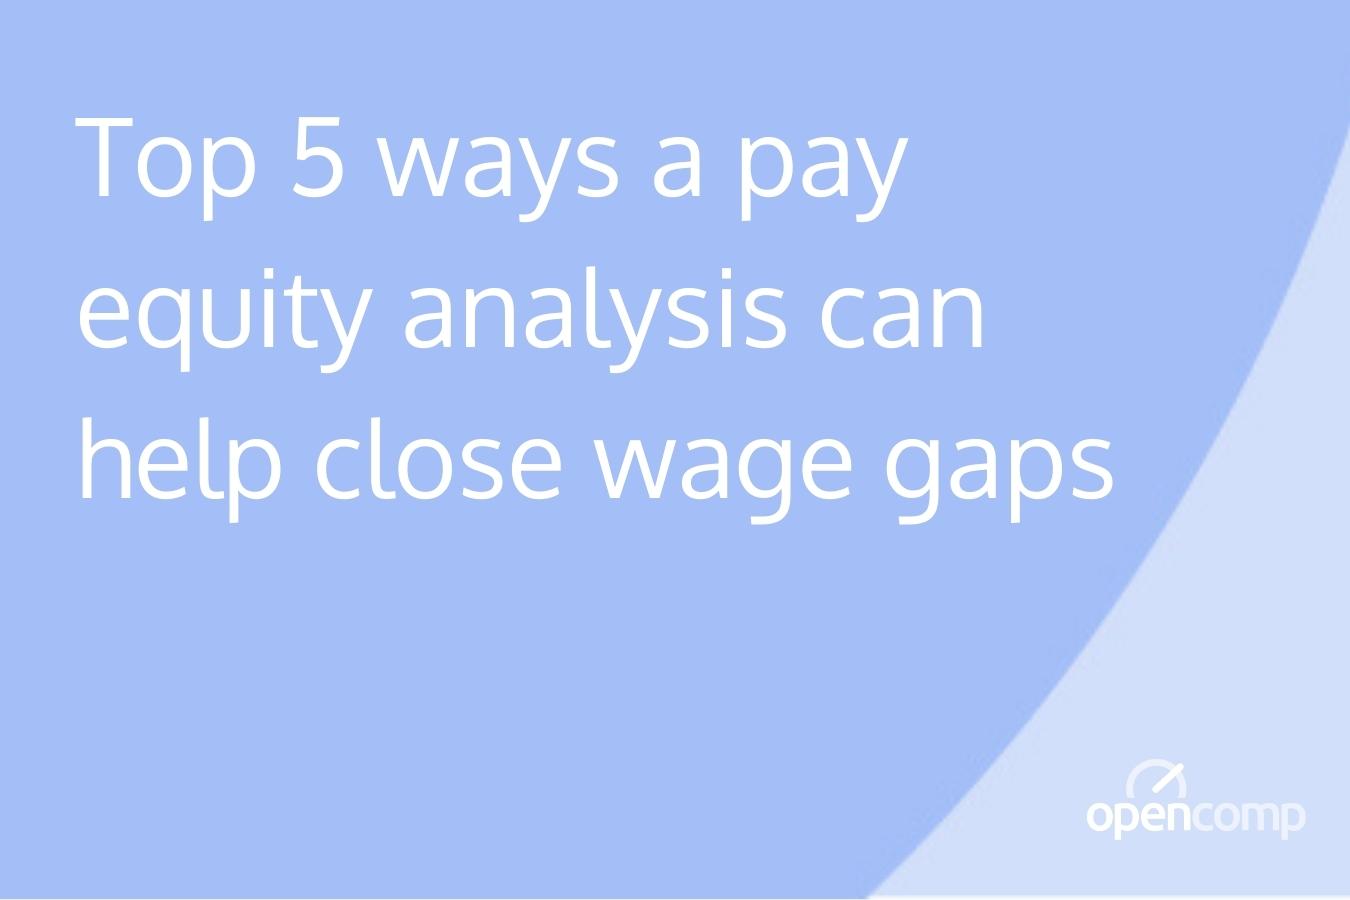 Top 5 ways a pay equity analysis can help close wage gaps-1